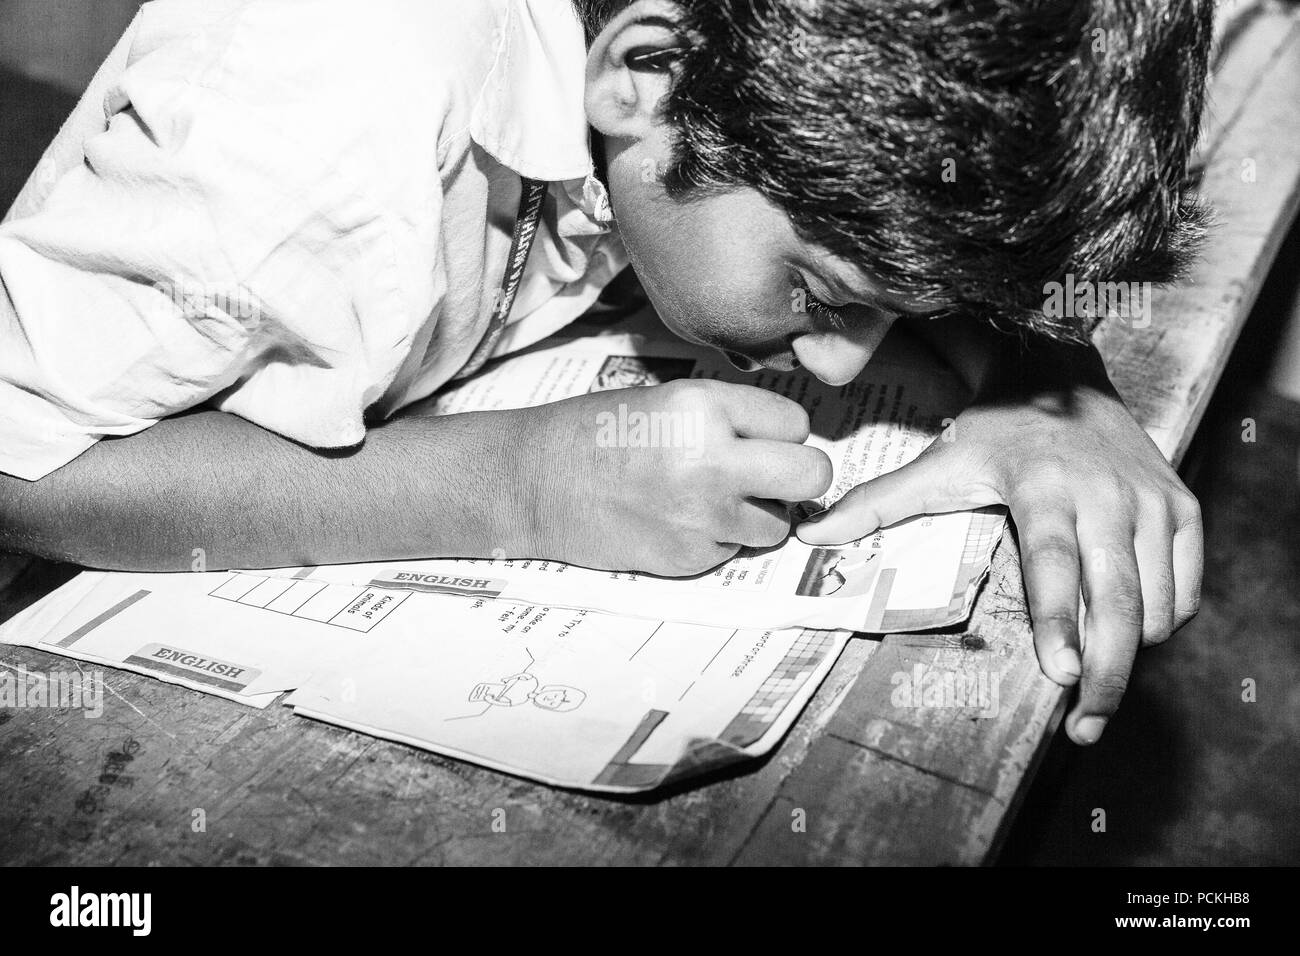 PONDICHERY, PUDUCHERRY, TAMIL NADU, INDIA - SEPTEMBER CIRCA, 2017. Close up portrait unidentified young, little boy child without glasses, writing on  Stock Photo